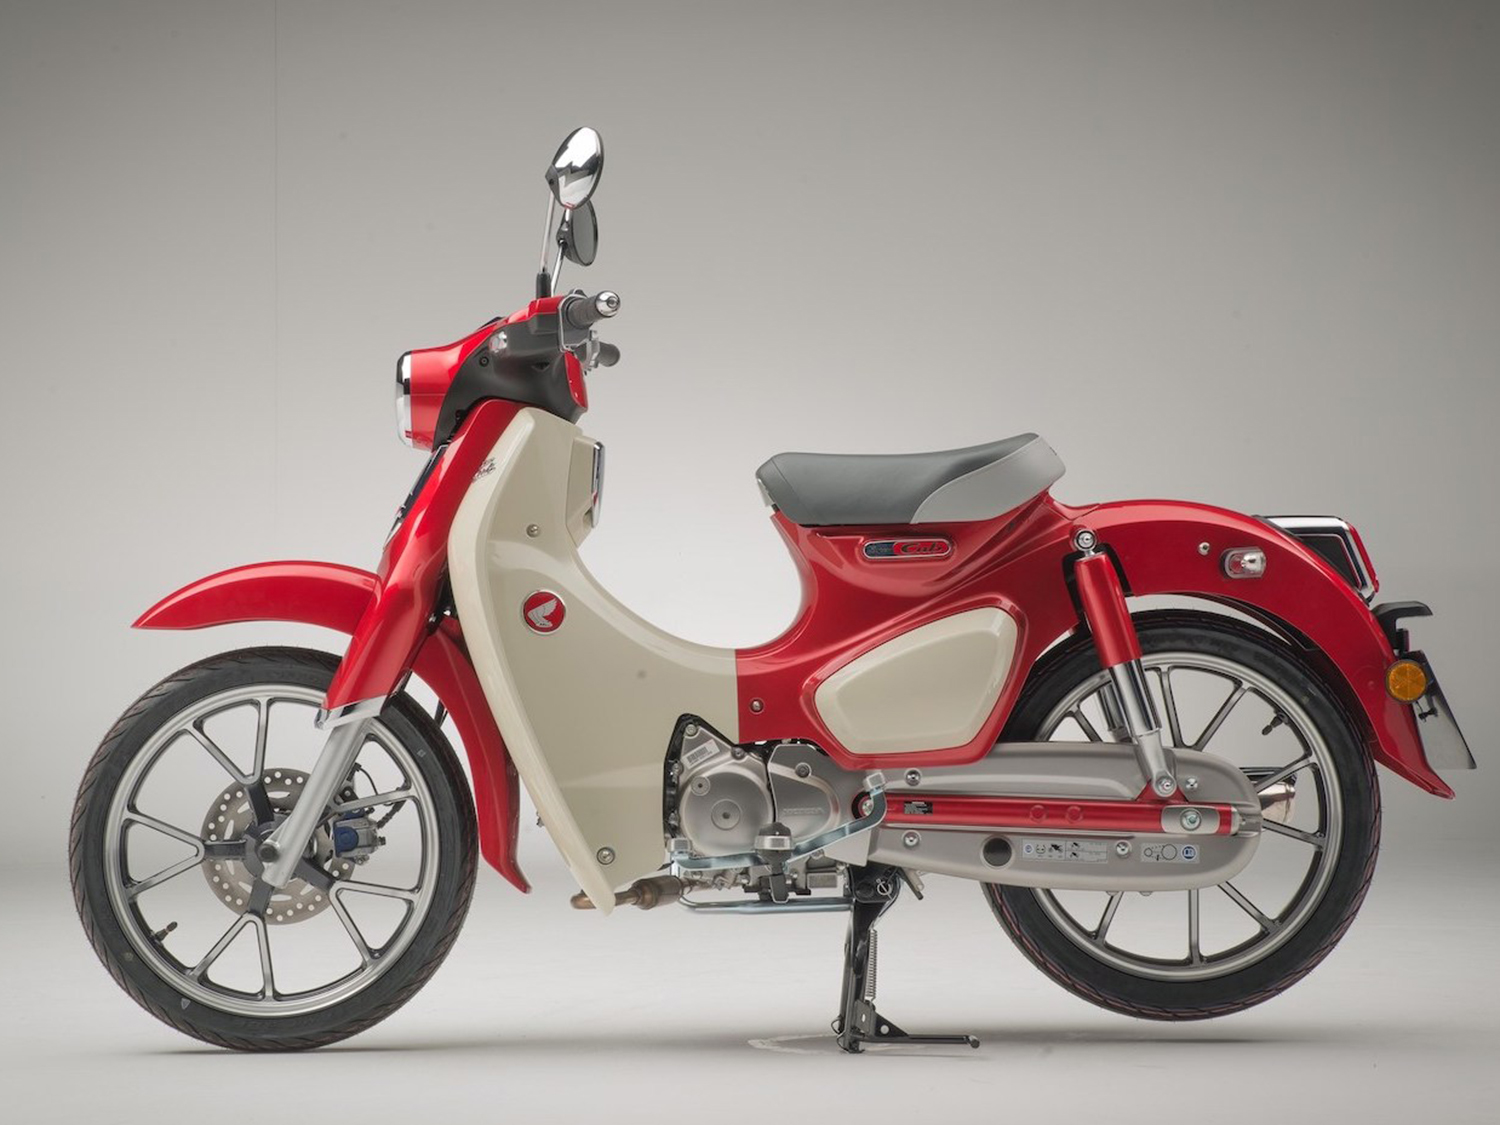 2020 Honda Super Cub C125 ABS Guide: Specs, Photos, Price | Cycle World